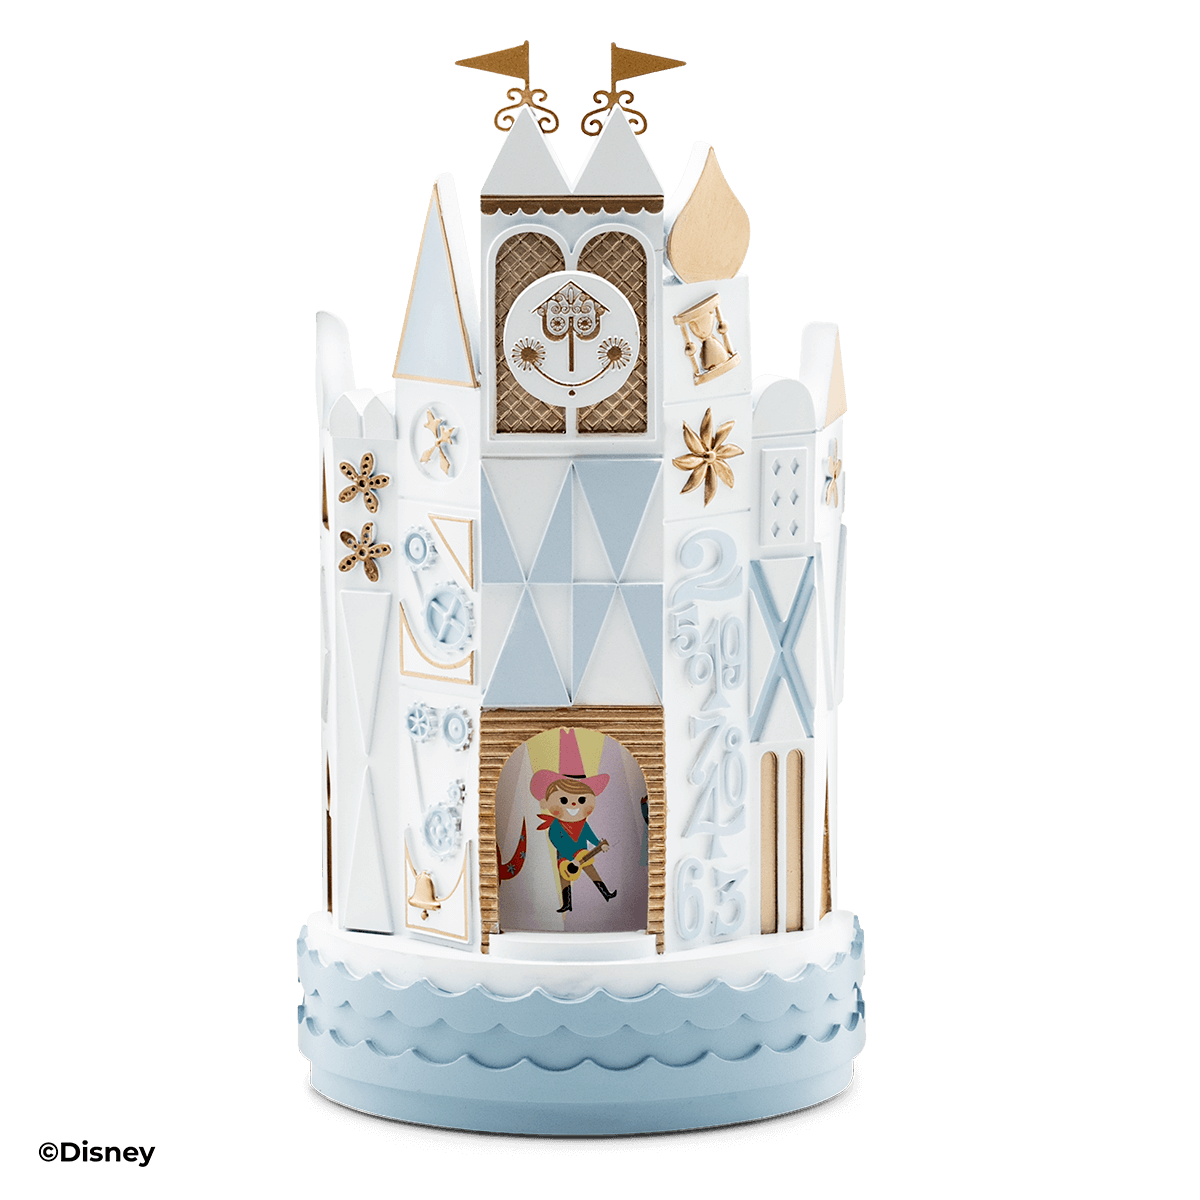 🗞 Just released…. Cinderella Castle and EARidescent Scentsy Brick  Pre-orders starting Tomorrow. $25 Deposit! March 8th-15th only. Expected  redemption is late October 👑 🏰👑🏰👑🏰👑🏰👑🏰👑🏰 🏰 Walt Disney World  50th Anniversary celebration: Cinderella